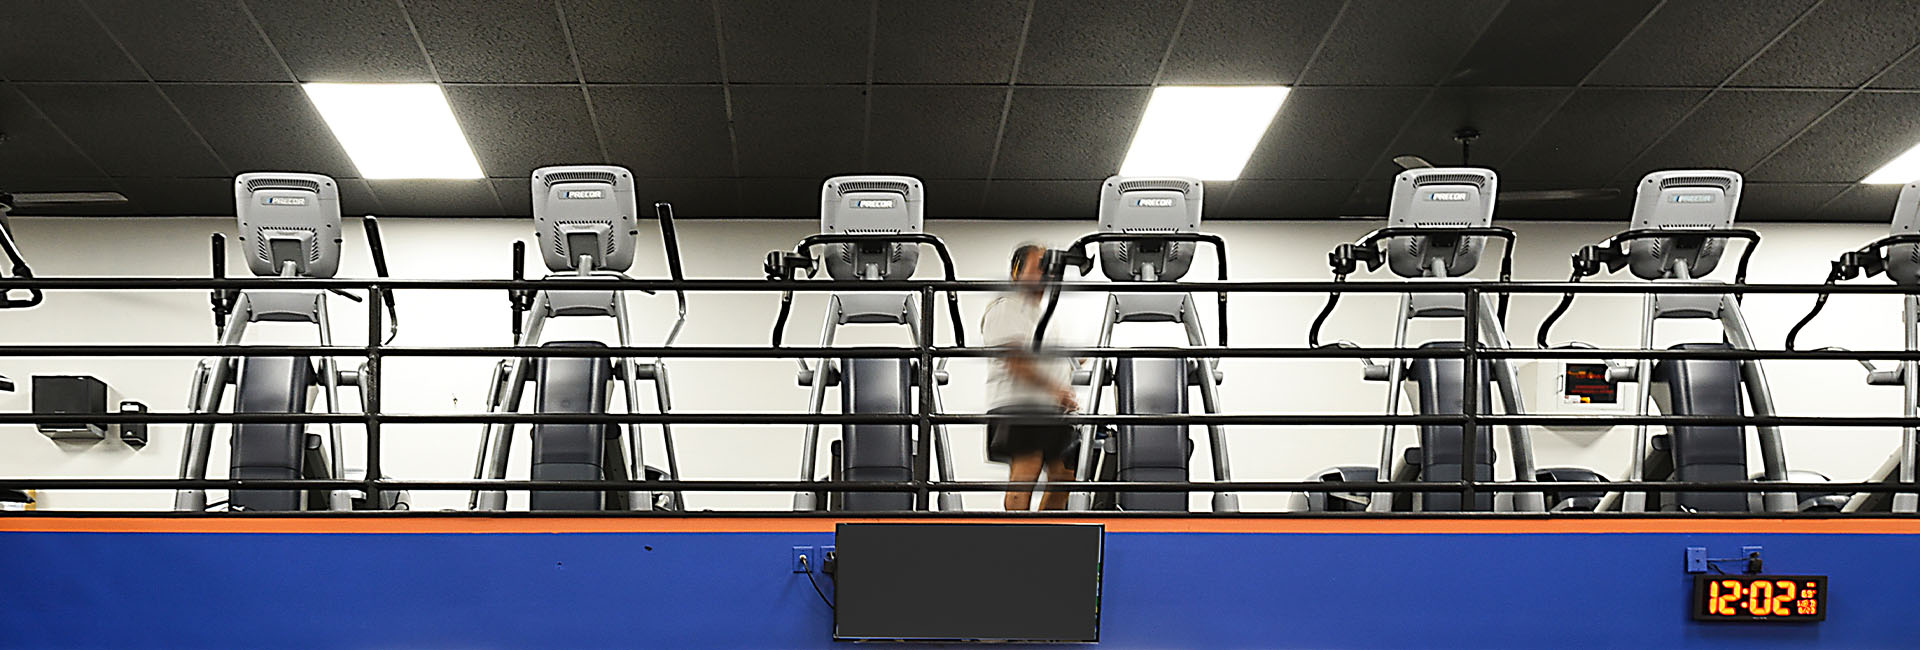 rows of treadmills and cardio equipment